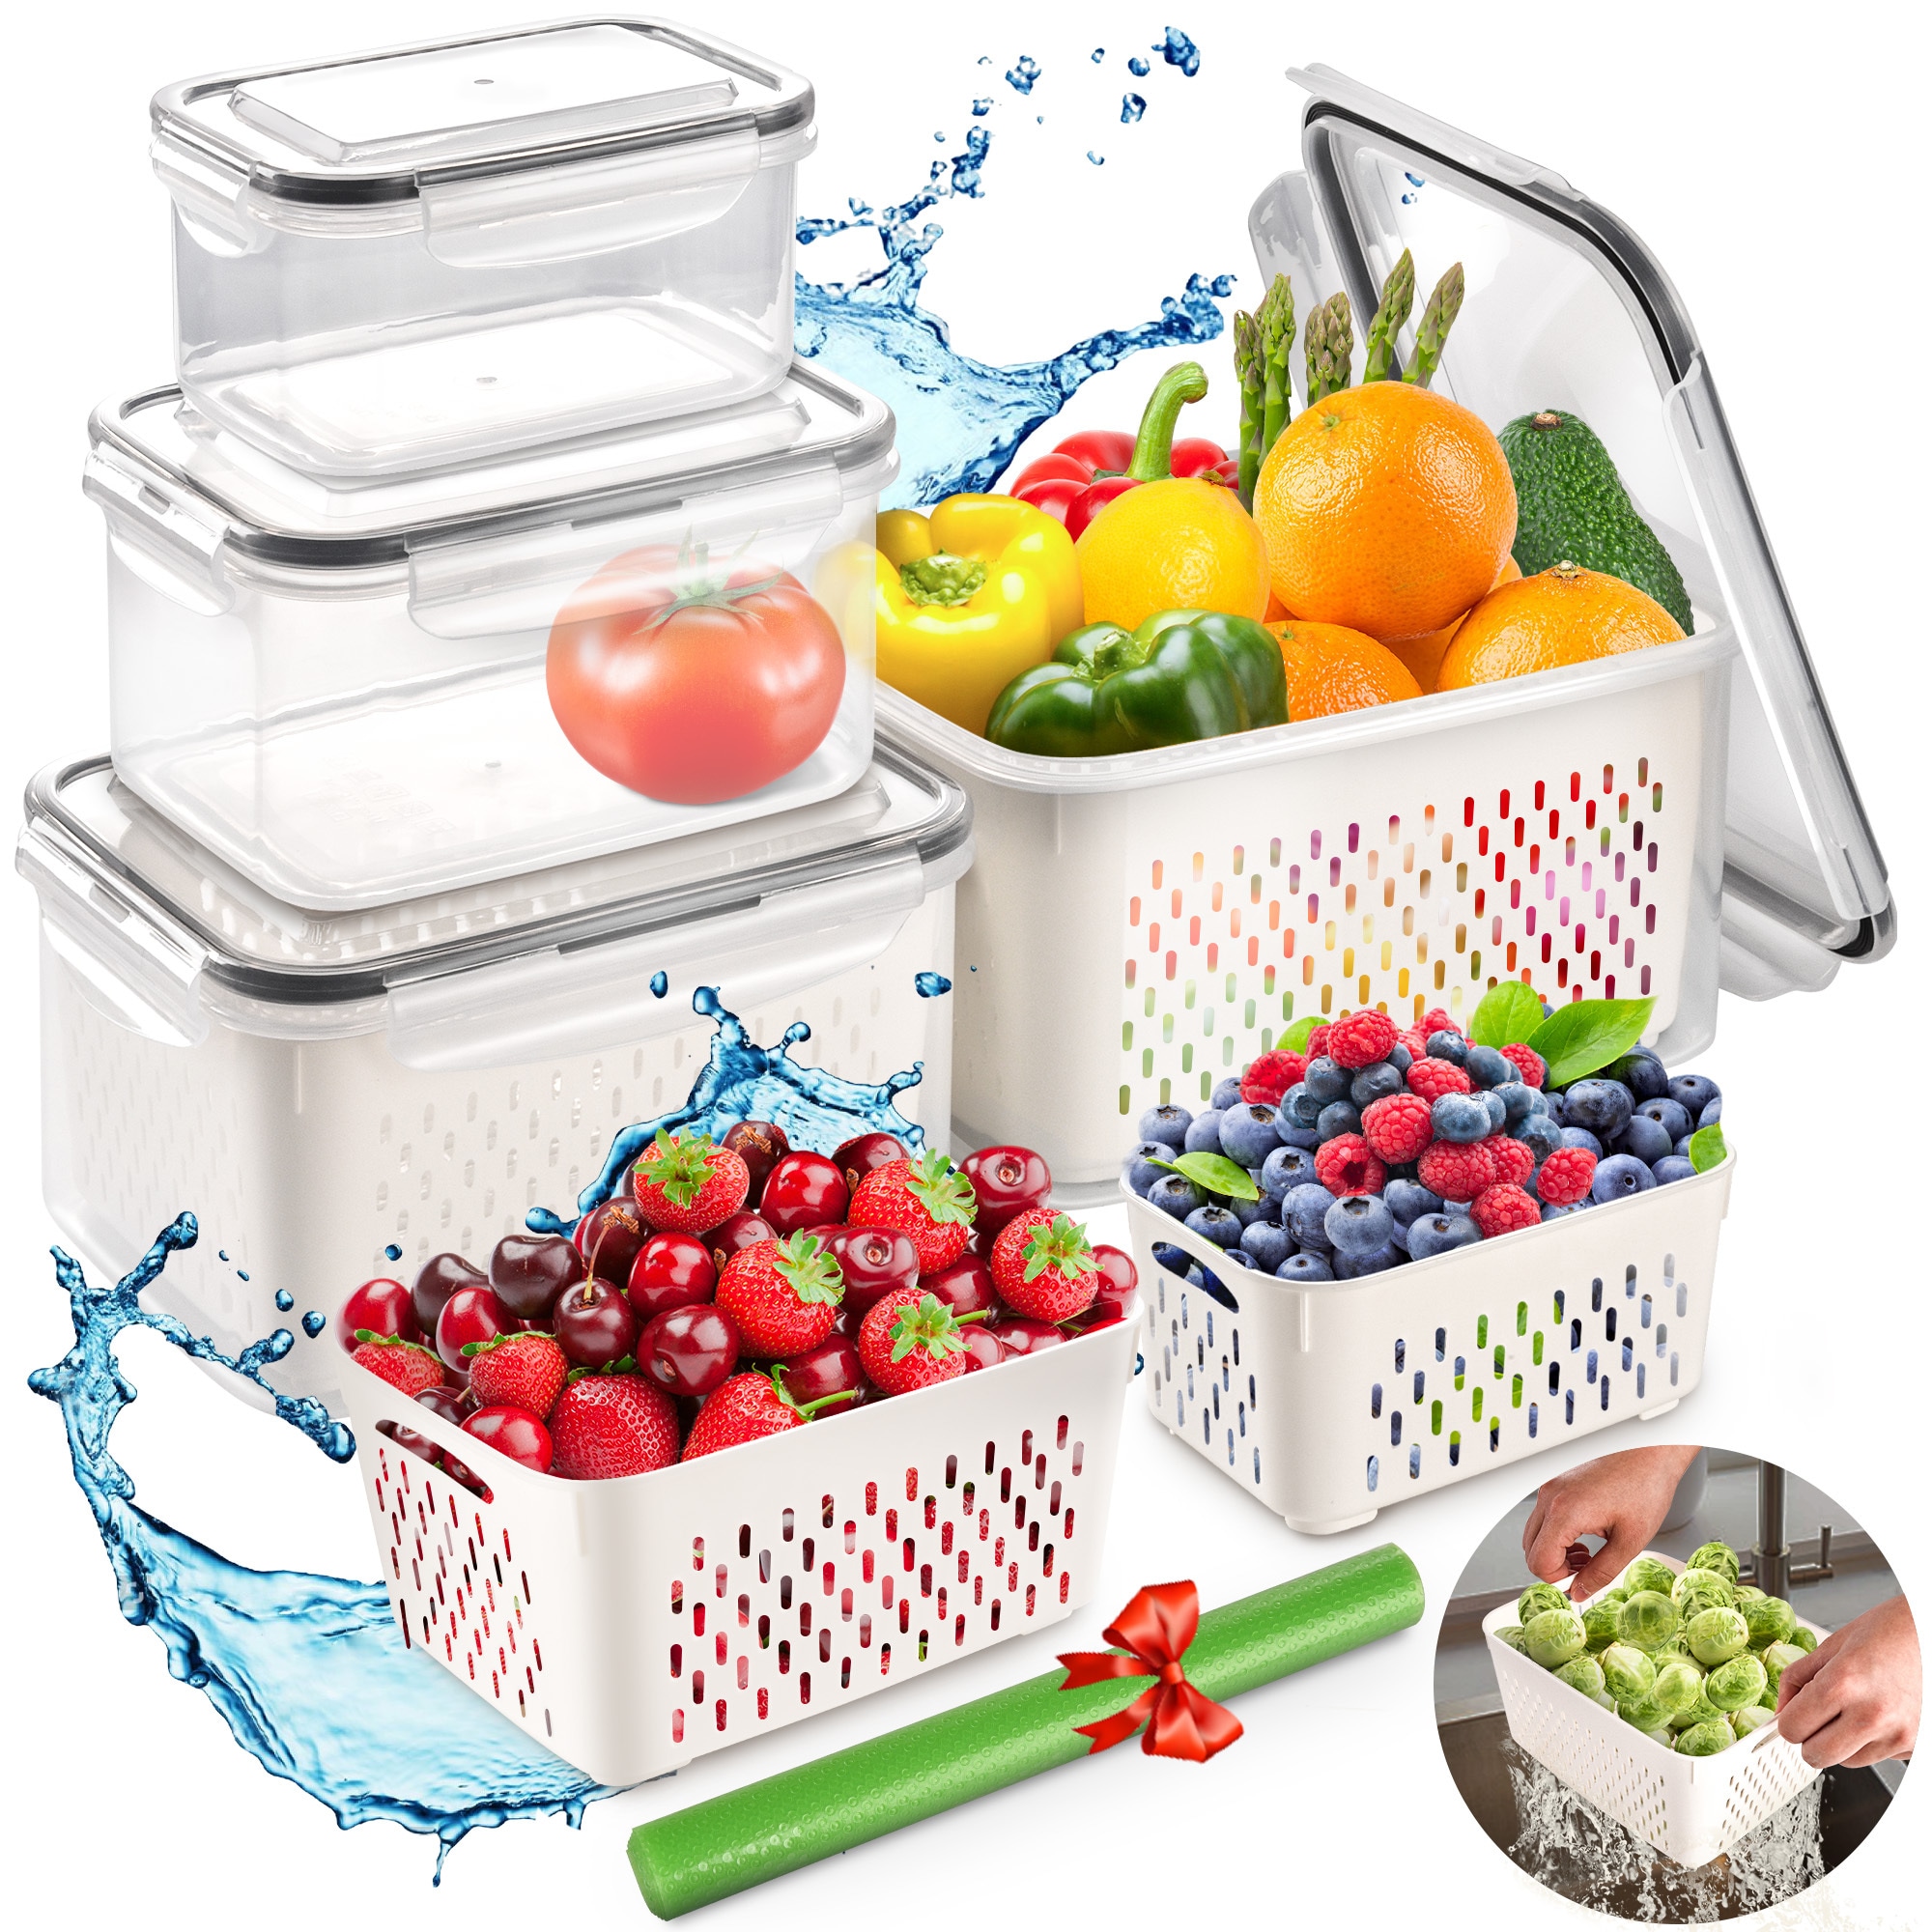 Plastic Food Storage Containers at Lowes.com